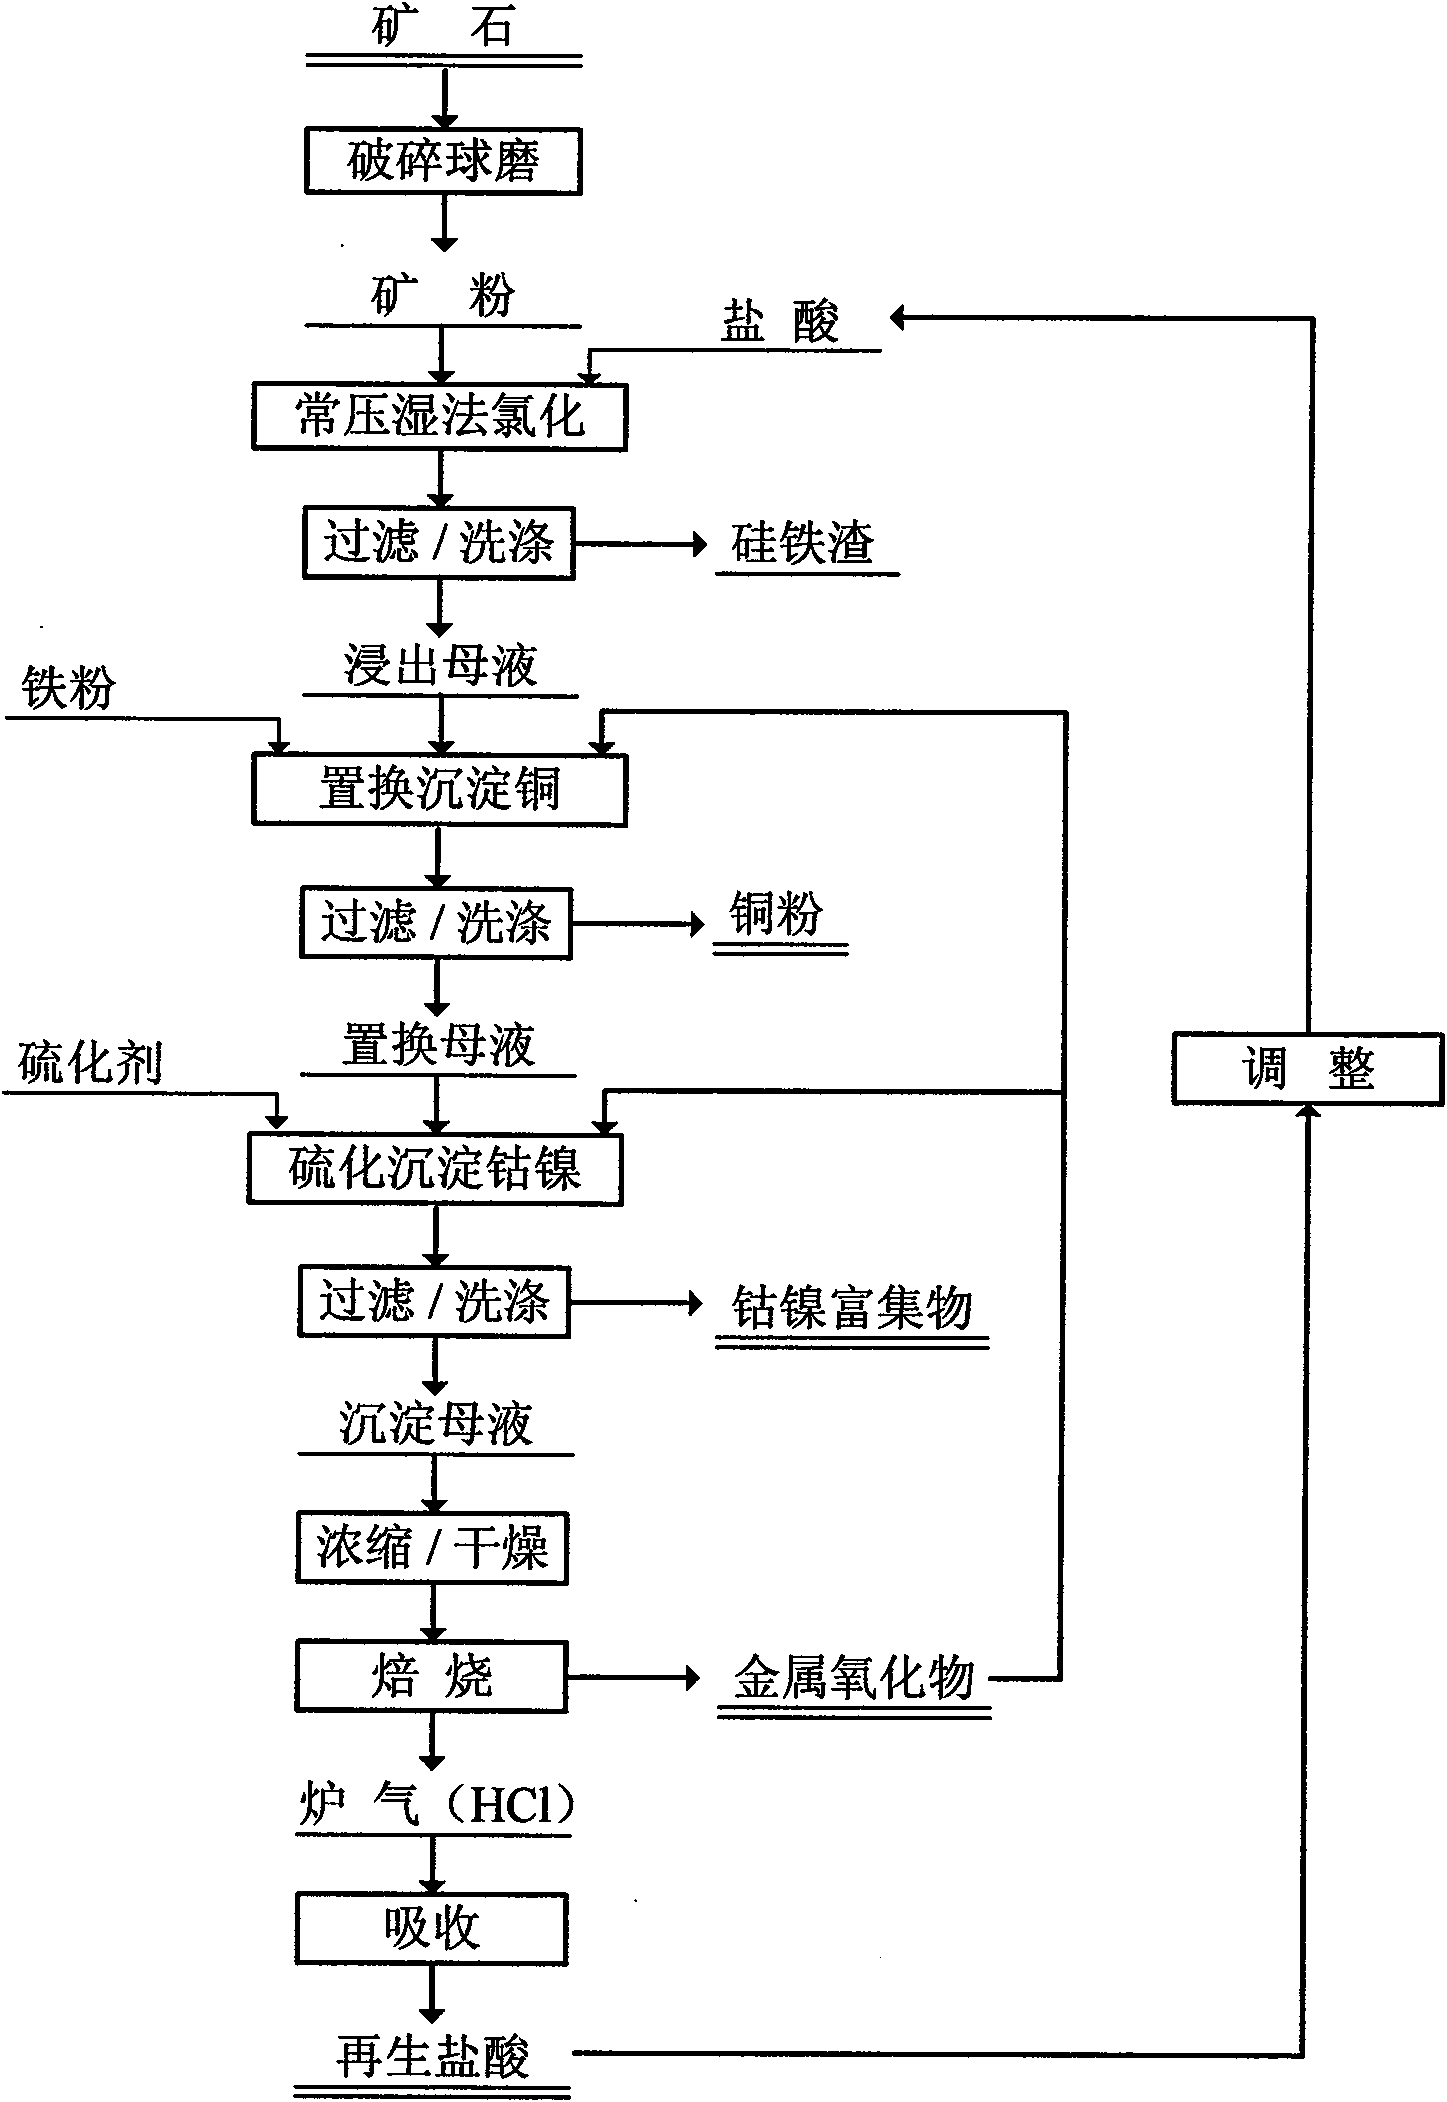 Method for separating and extracting copper and cobalt-nickel in low-grade copper-cobalt oxide ore